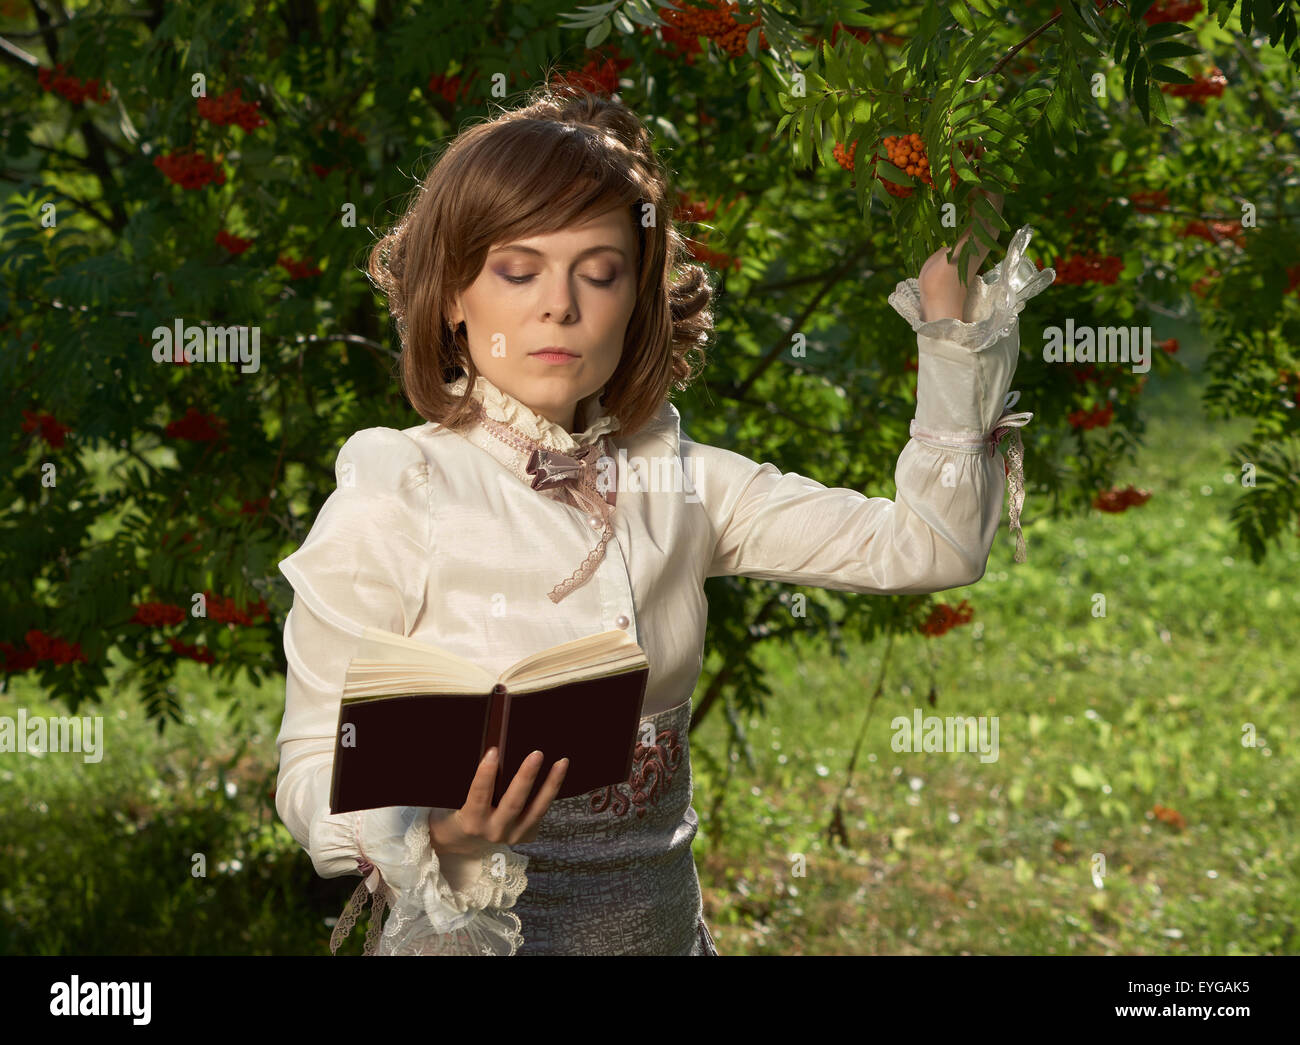 Beautiful girl in old style clothing touches rowan berries and reads book Stock Photo